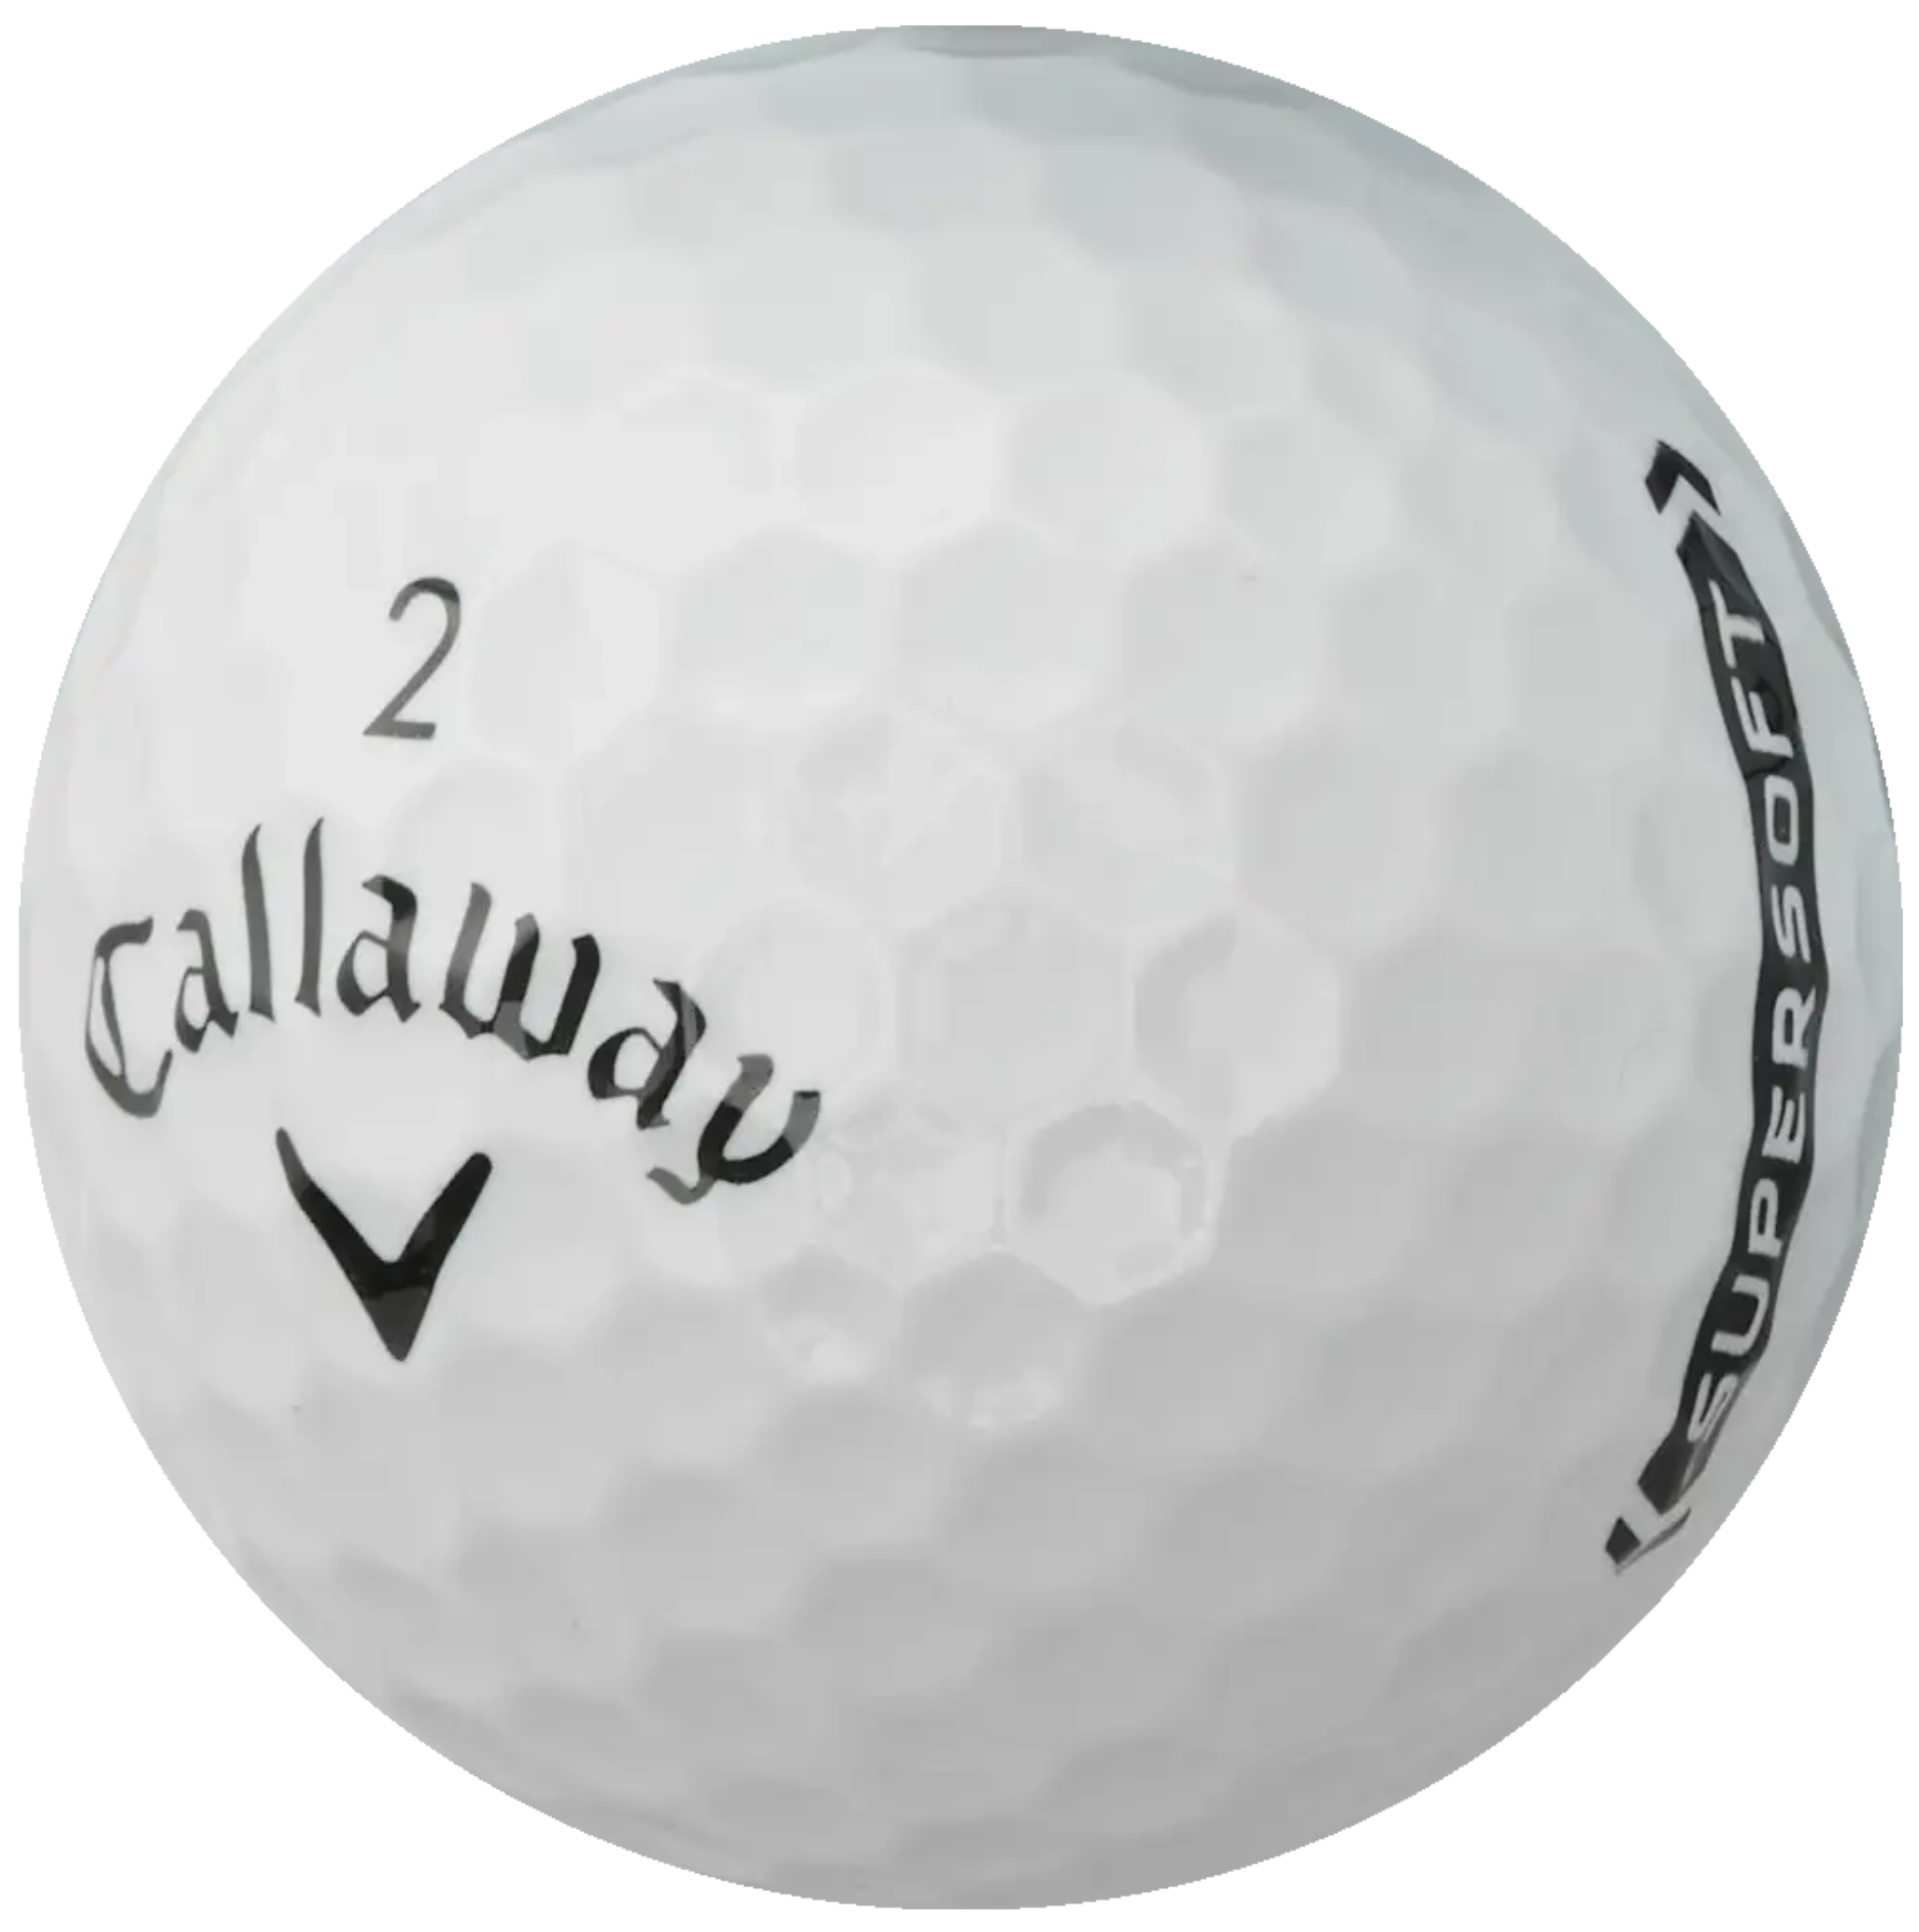 Callaway Supersoft, white